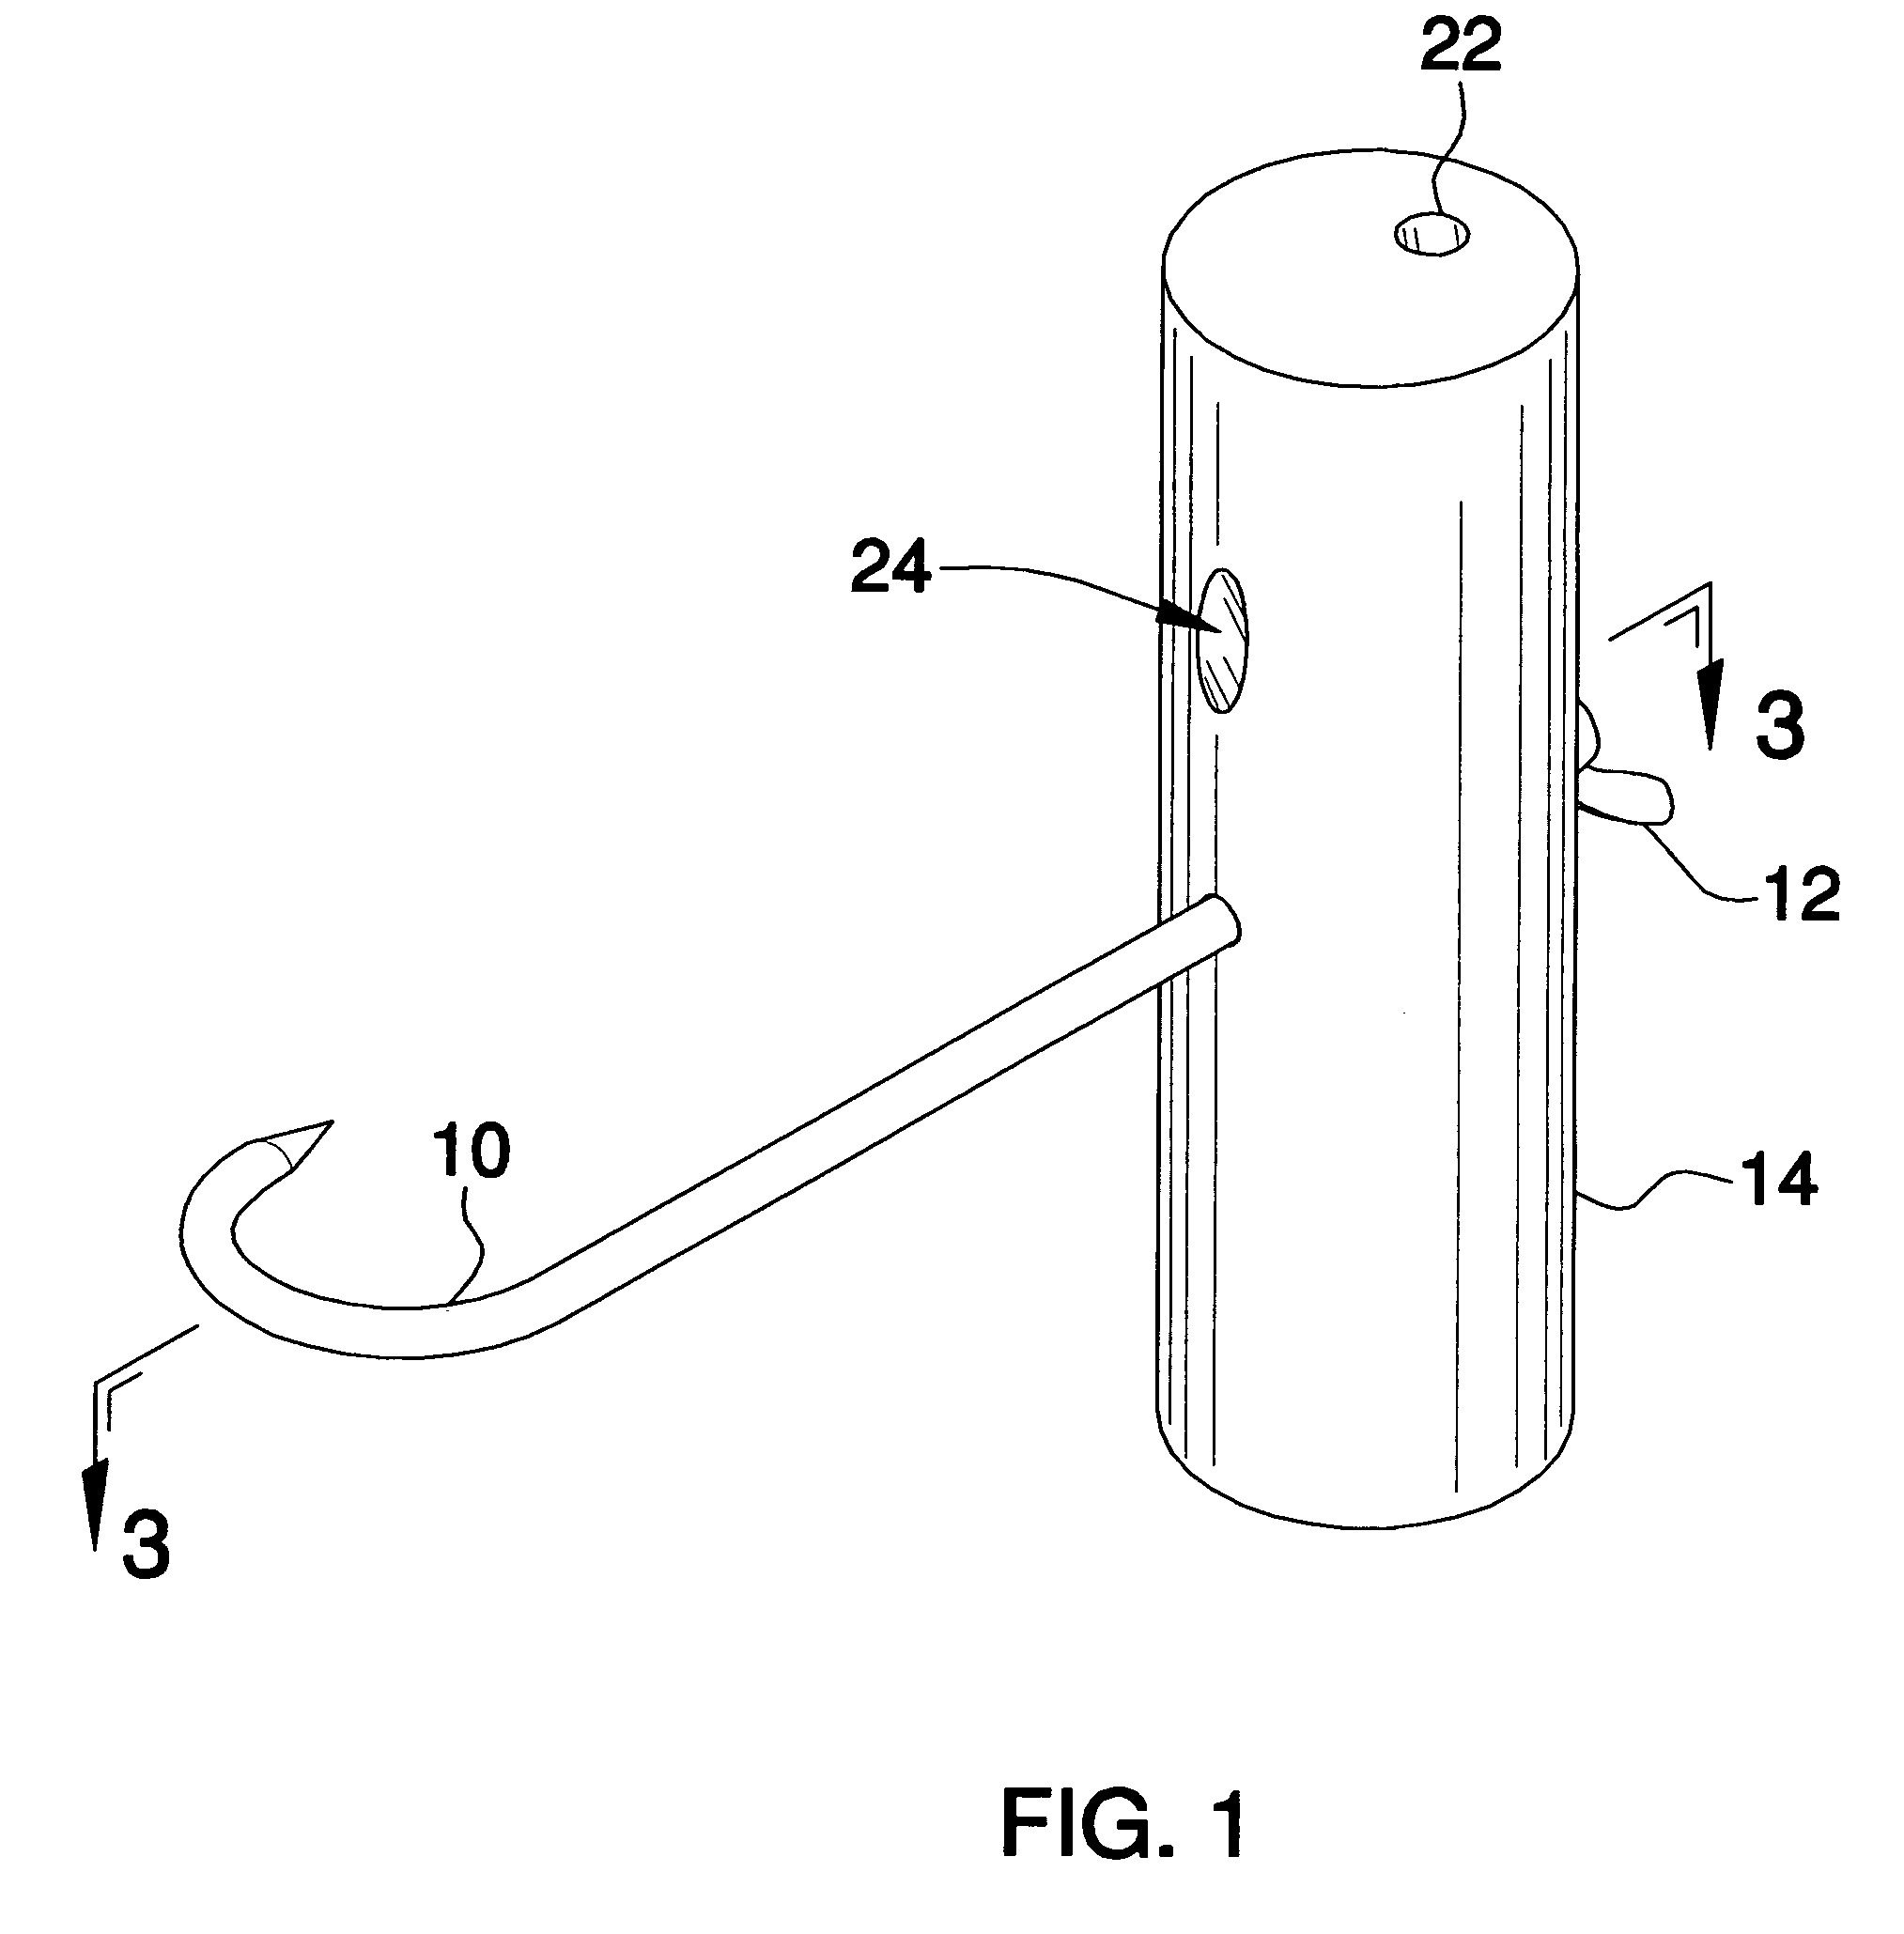 Animal dragger and method for using and storing the same